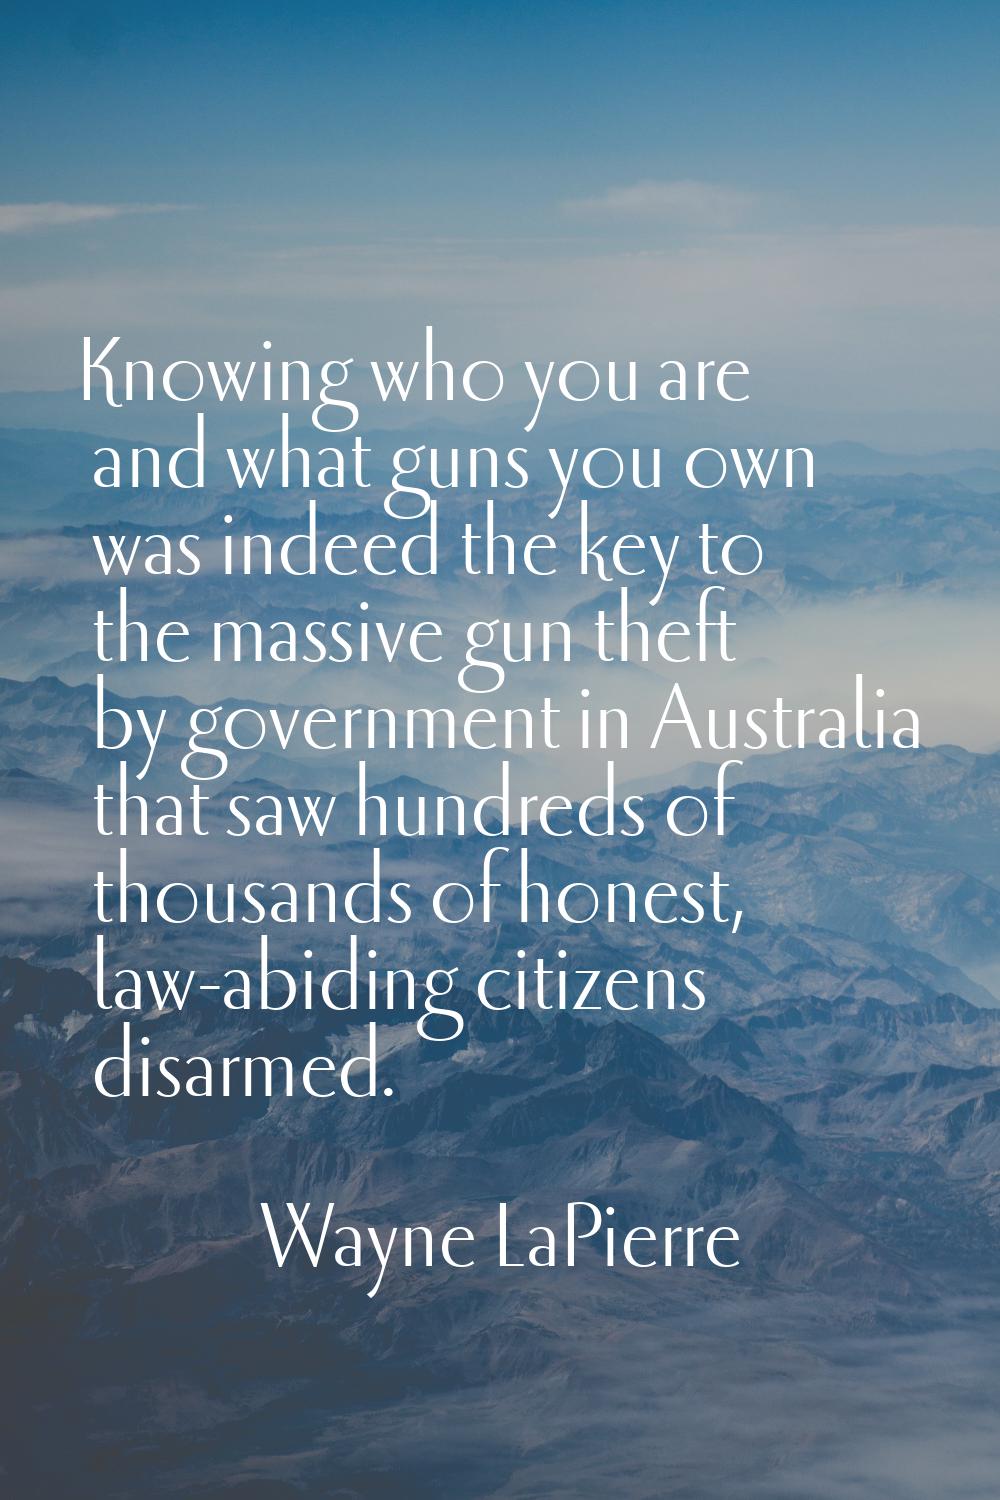 Knowing who you are and what guns you own was indeed the key to the massive gun theft by government